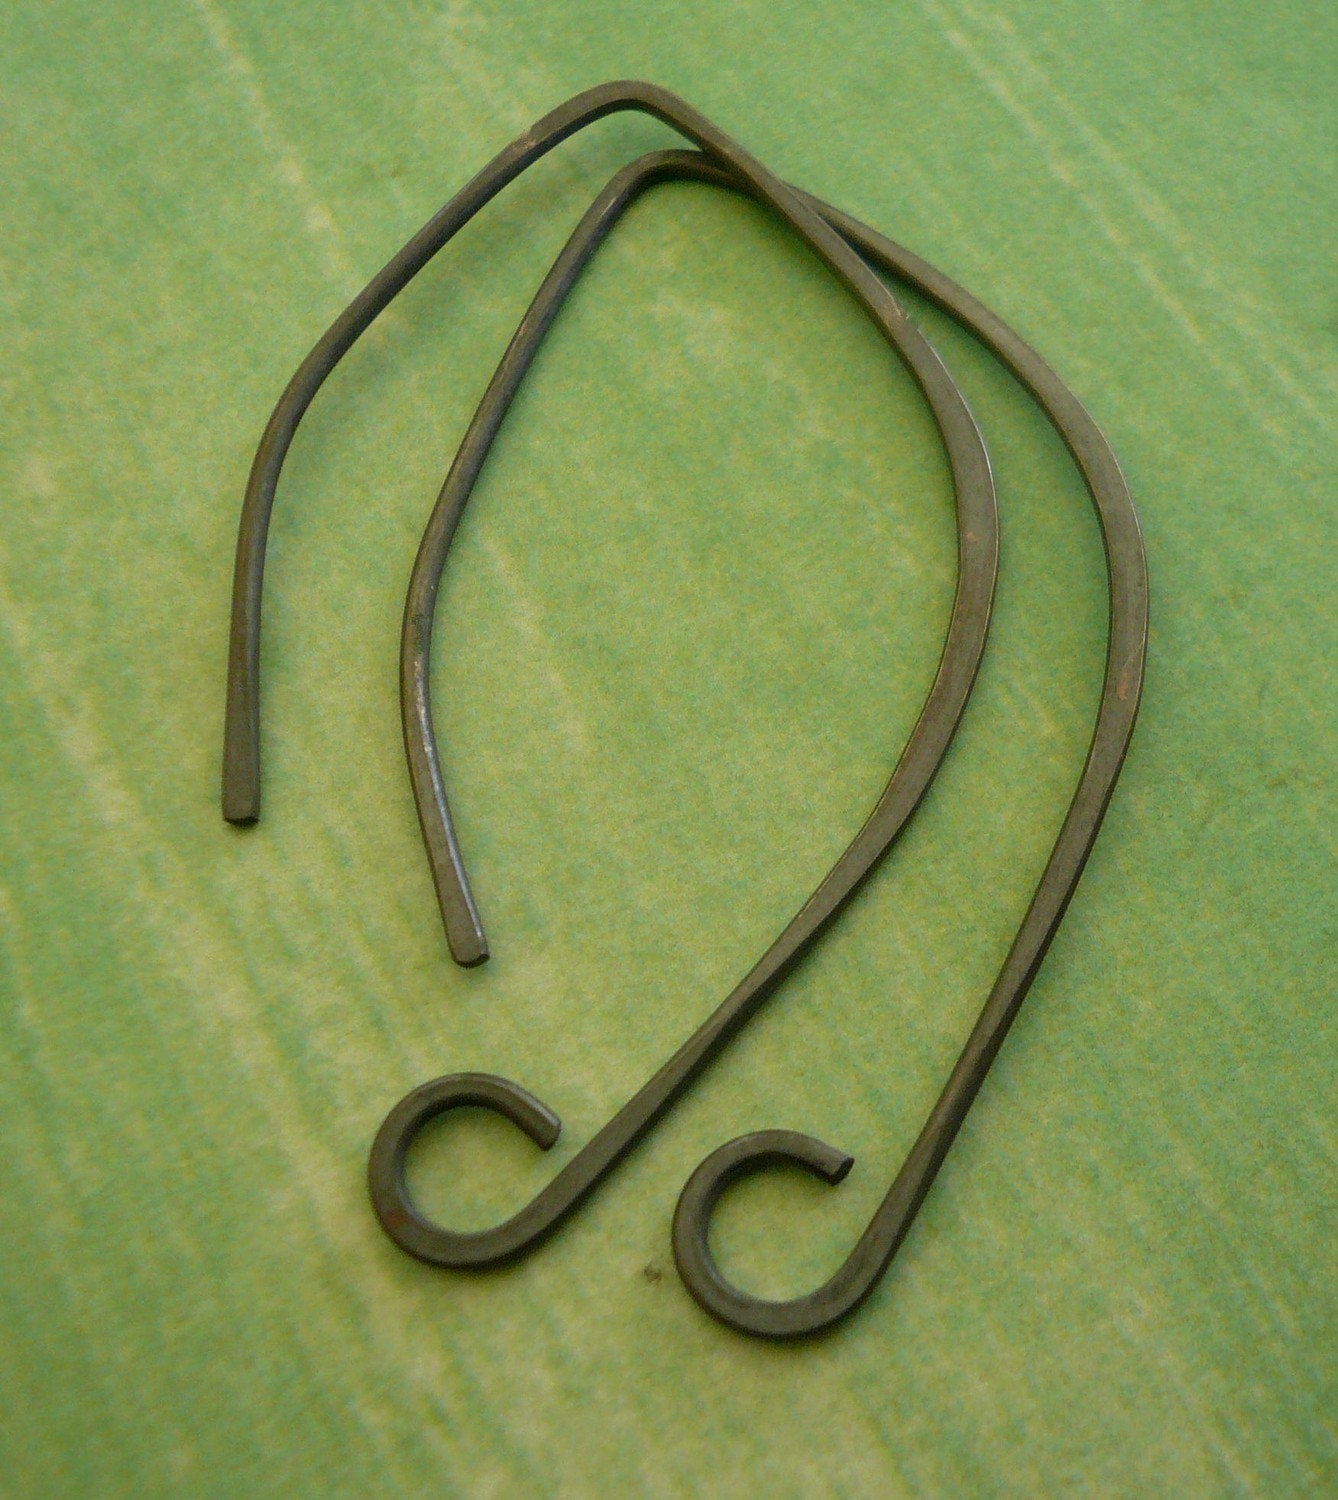 12 Pairs of my Hint Sterling Silver Earwires - Handmade. Handforged. Heavily Oxidized